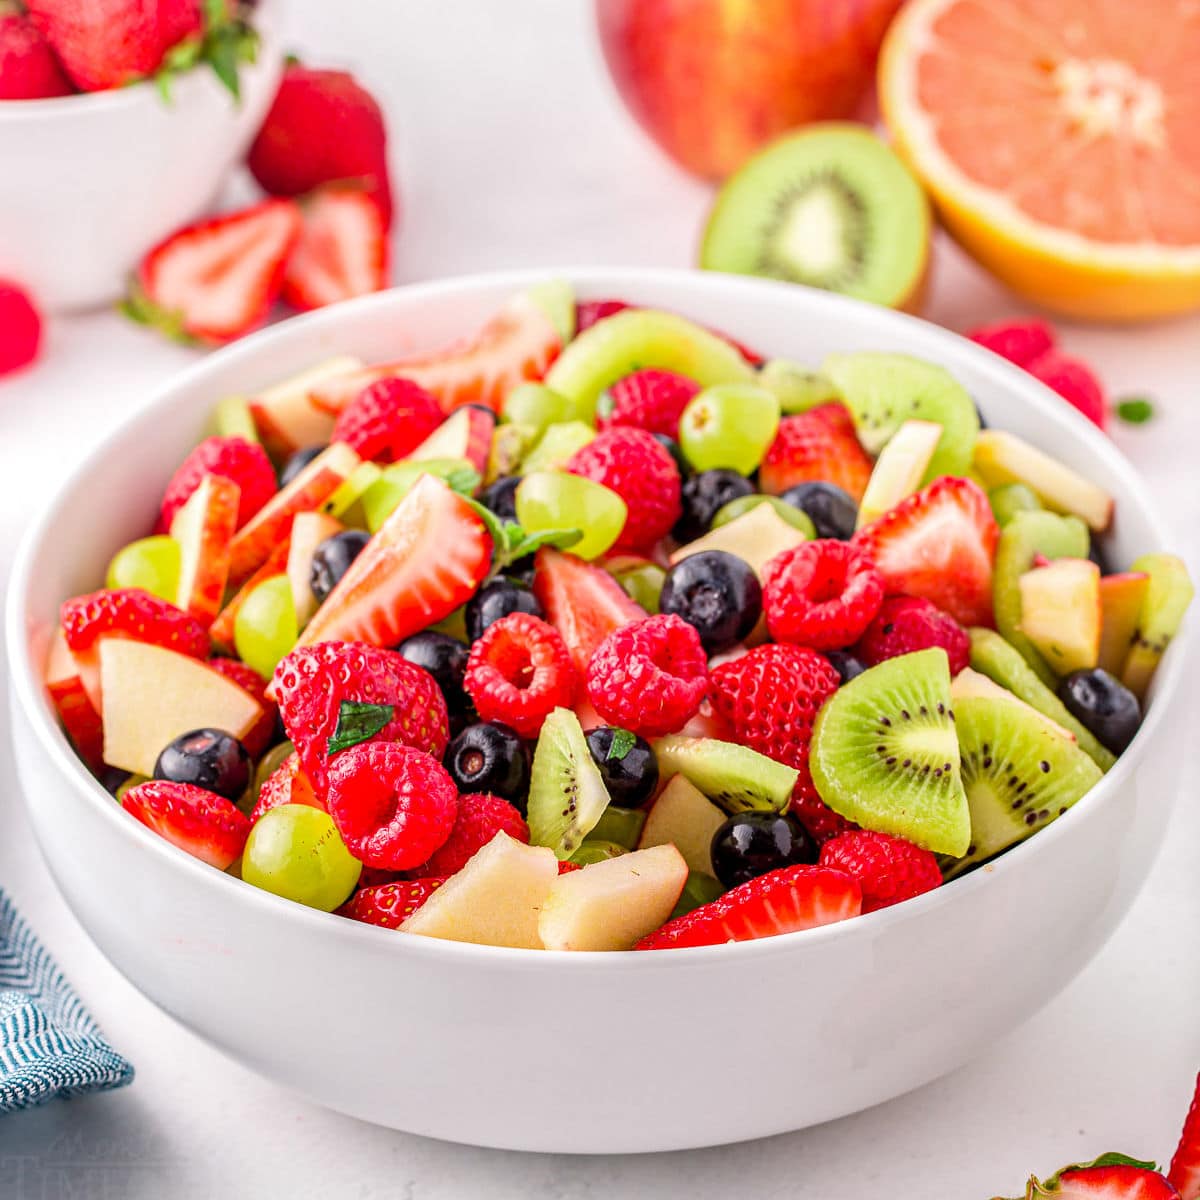 light and refreshing fruit salad with summer fruits in large white serving dish.